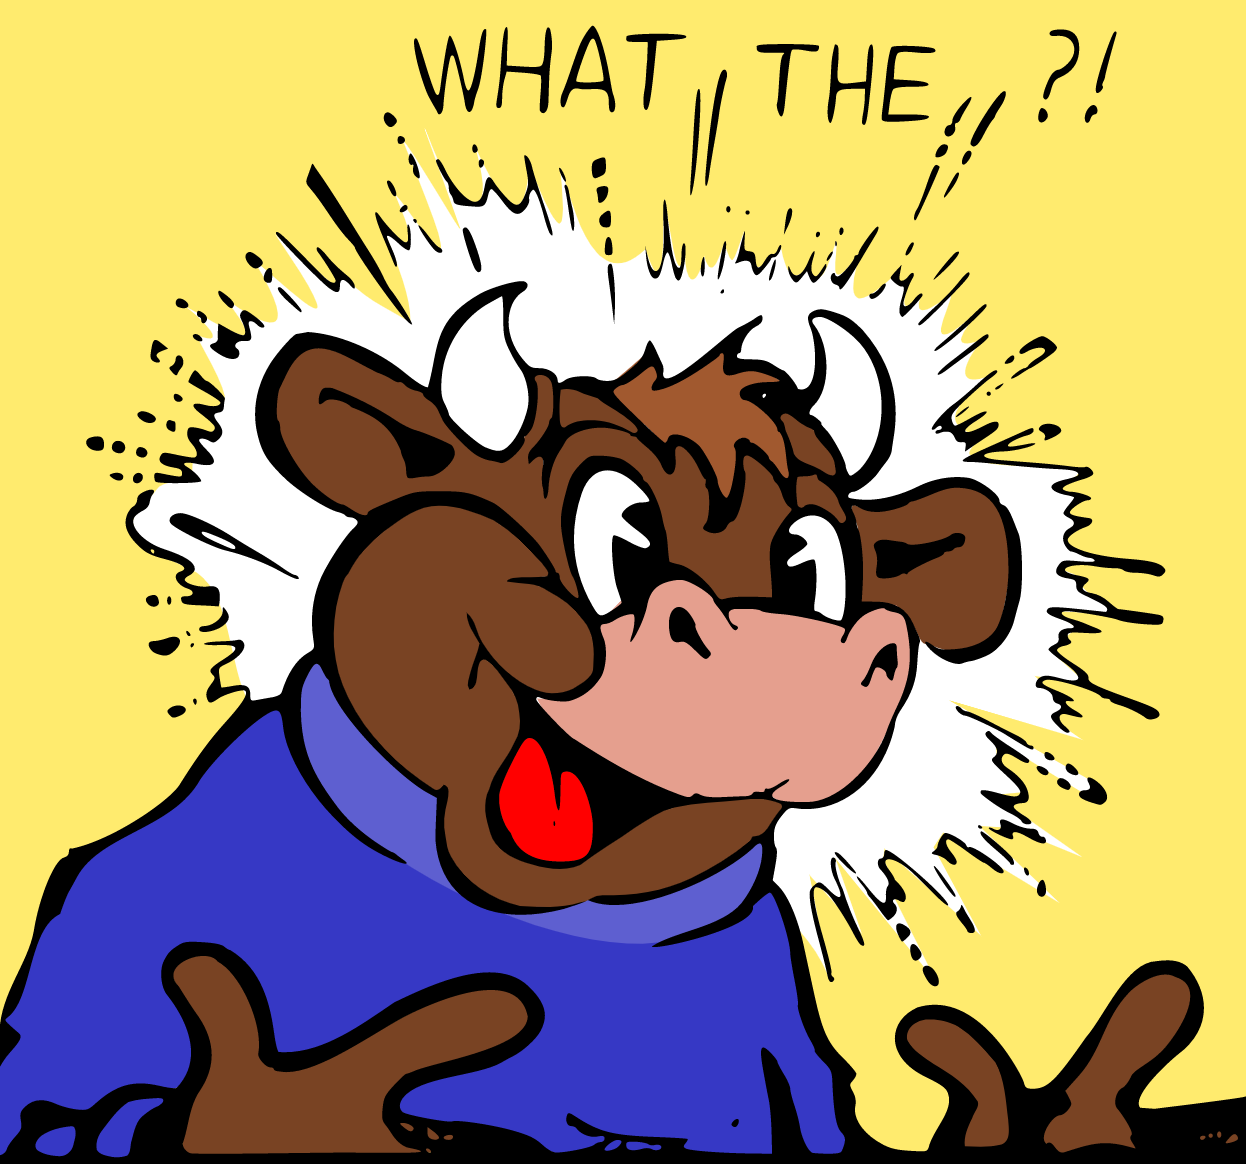 Cartoon cow in sweater saying, “What the…?” Image by OpenClipart, via FreeSVG.com, CC0 Public Domain.